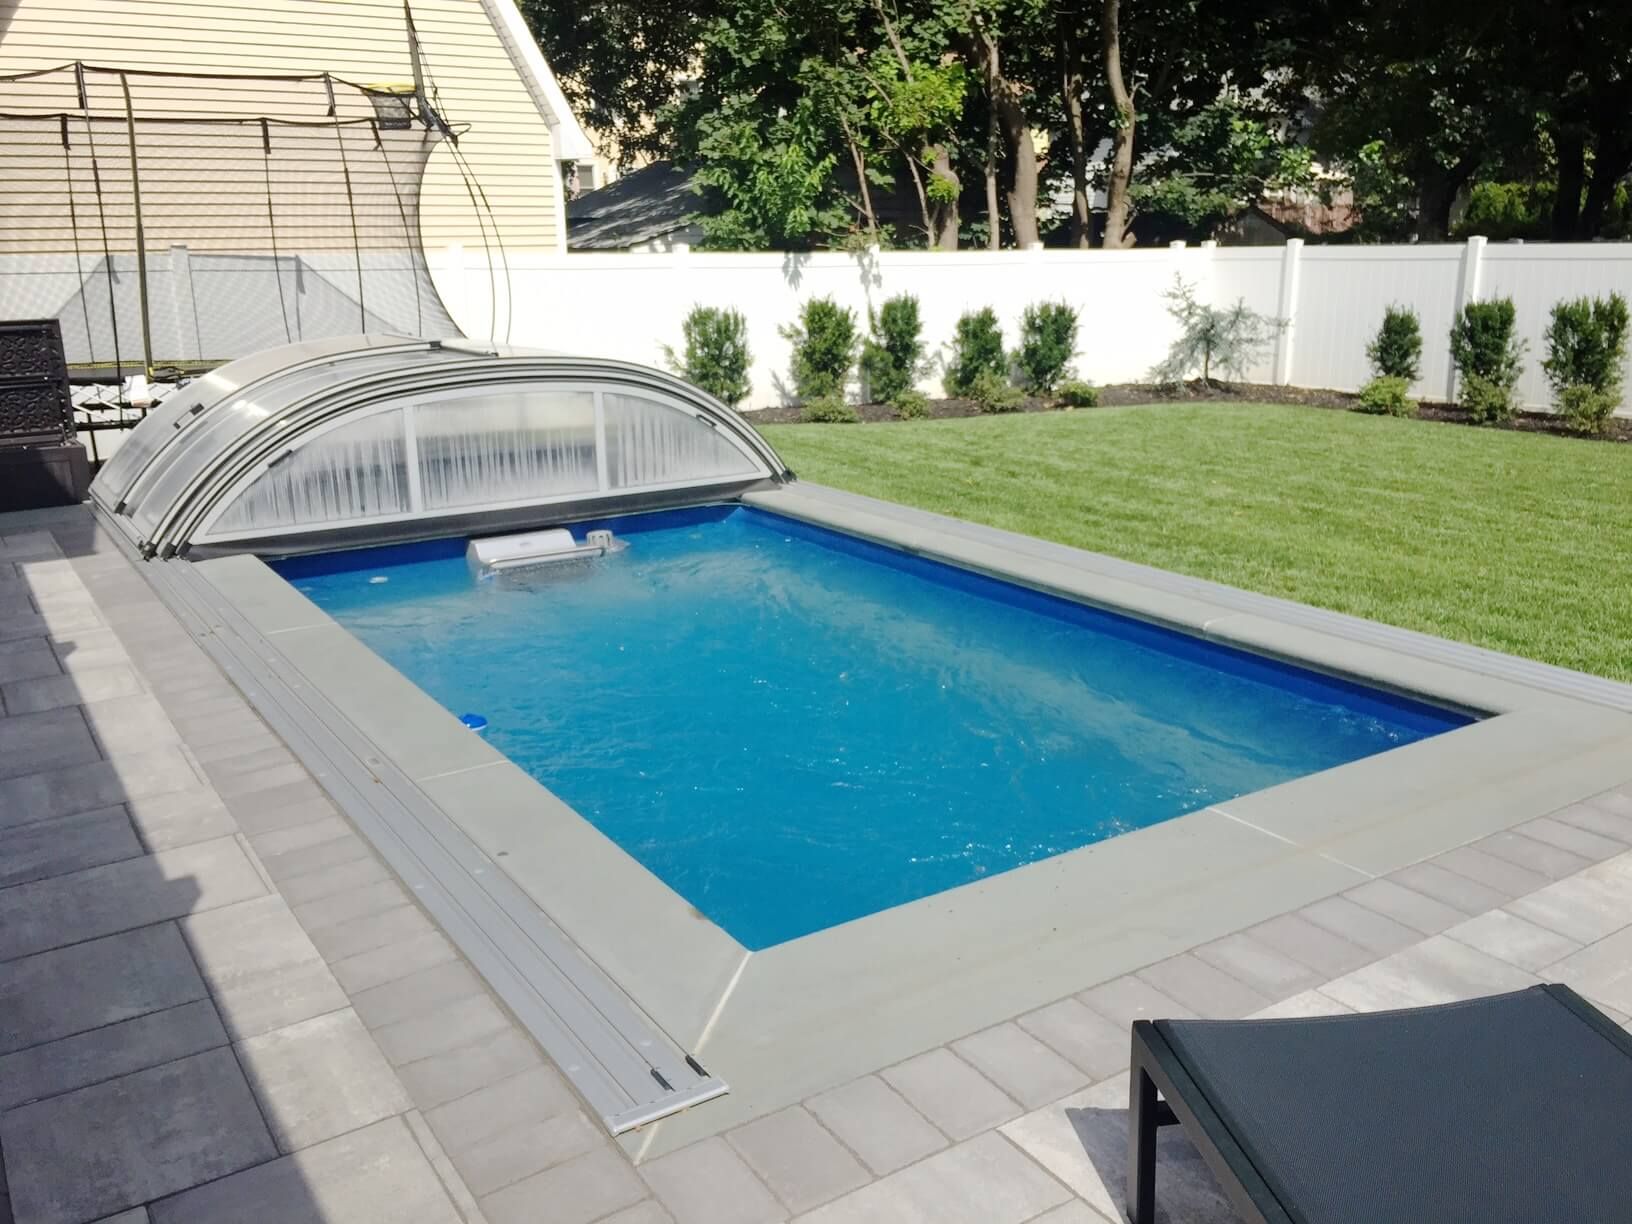 a fully in-ground Endless Pool enclosure, retracted